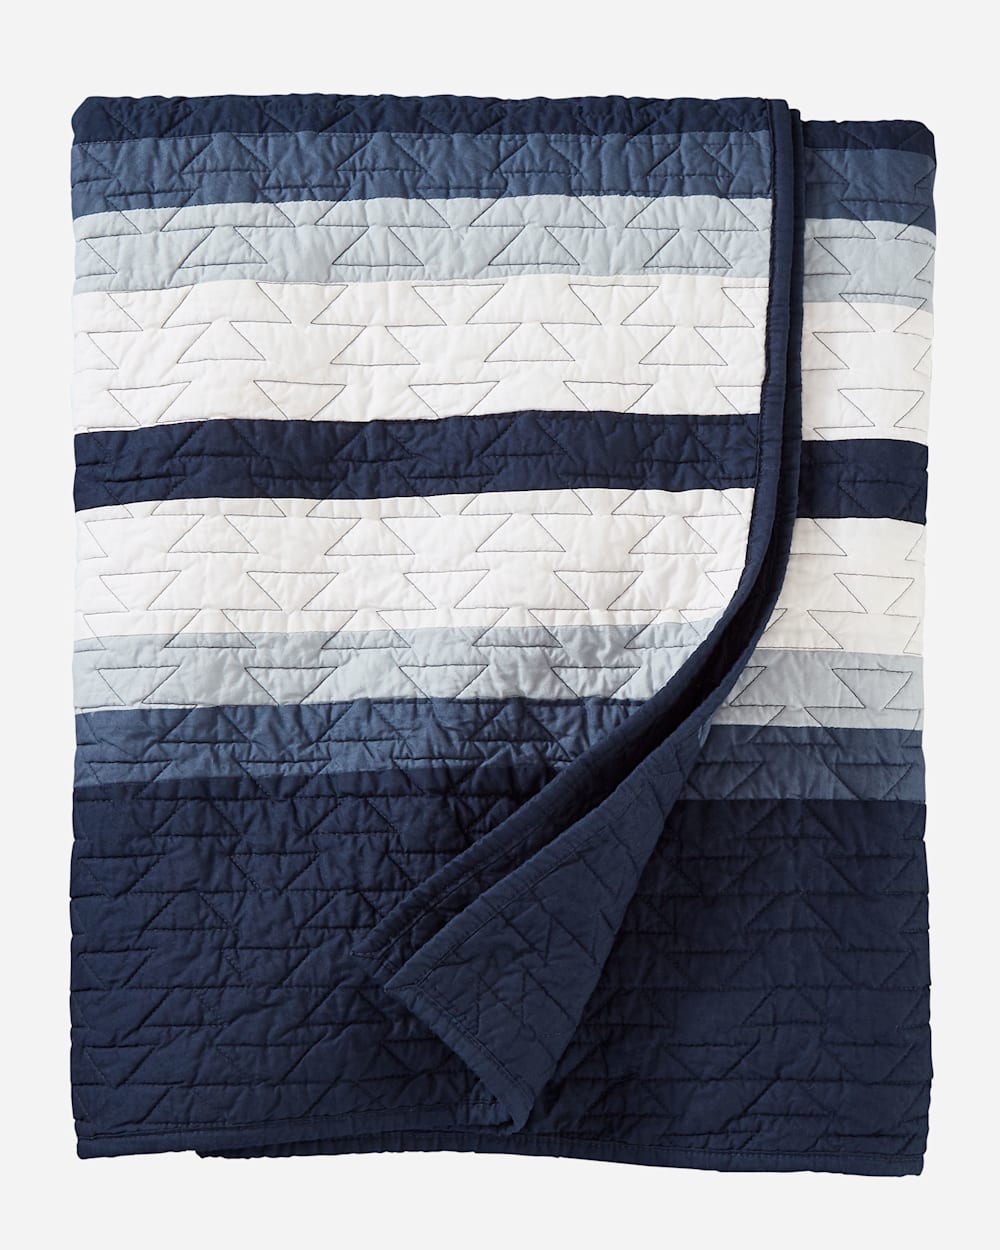 ALTERNATE VIEW OF CHIEF STAR PIECED QUILT SET IN NAVY image number 3